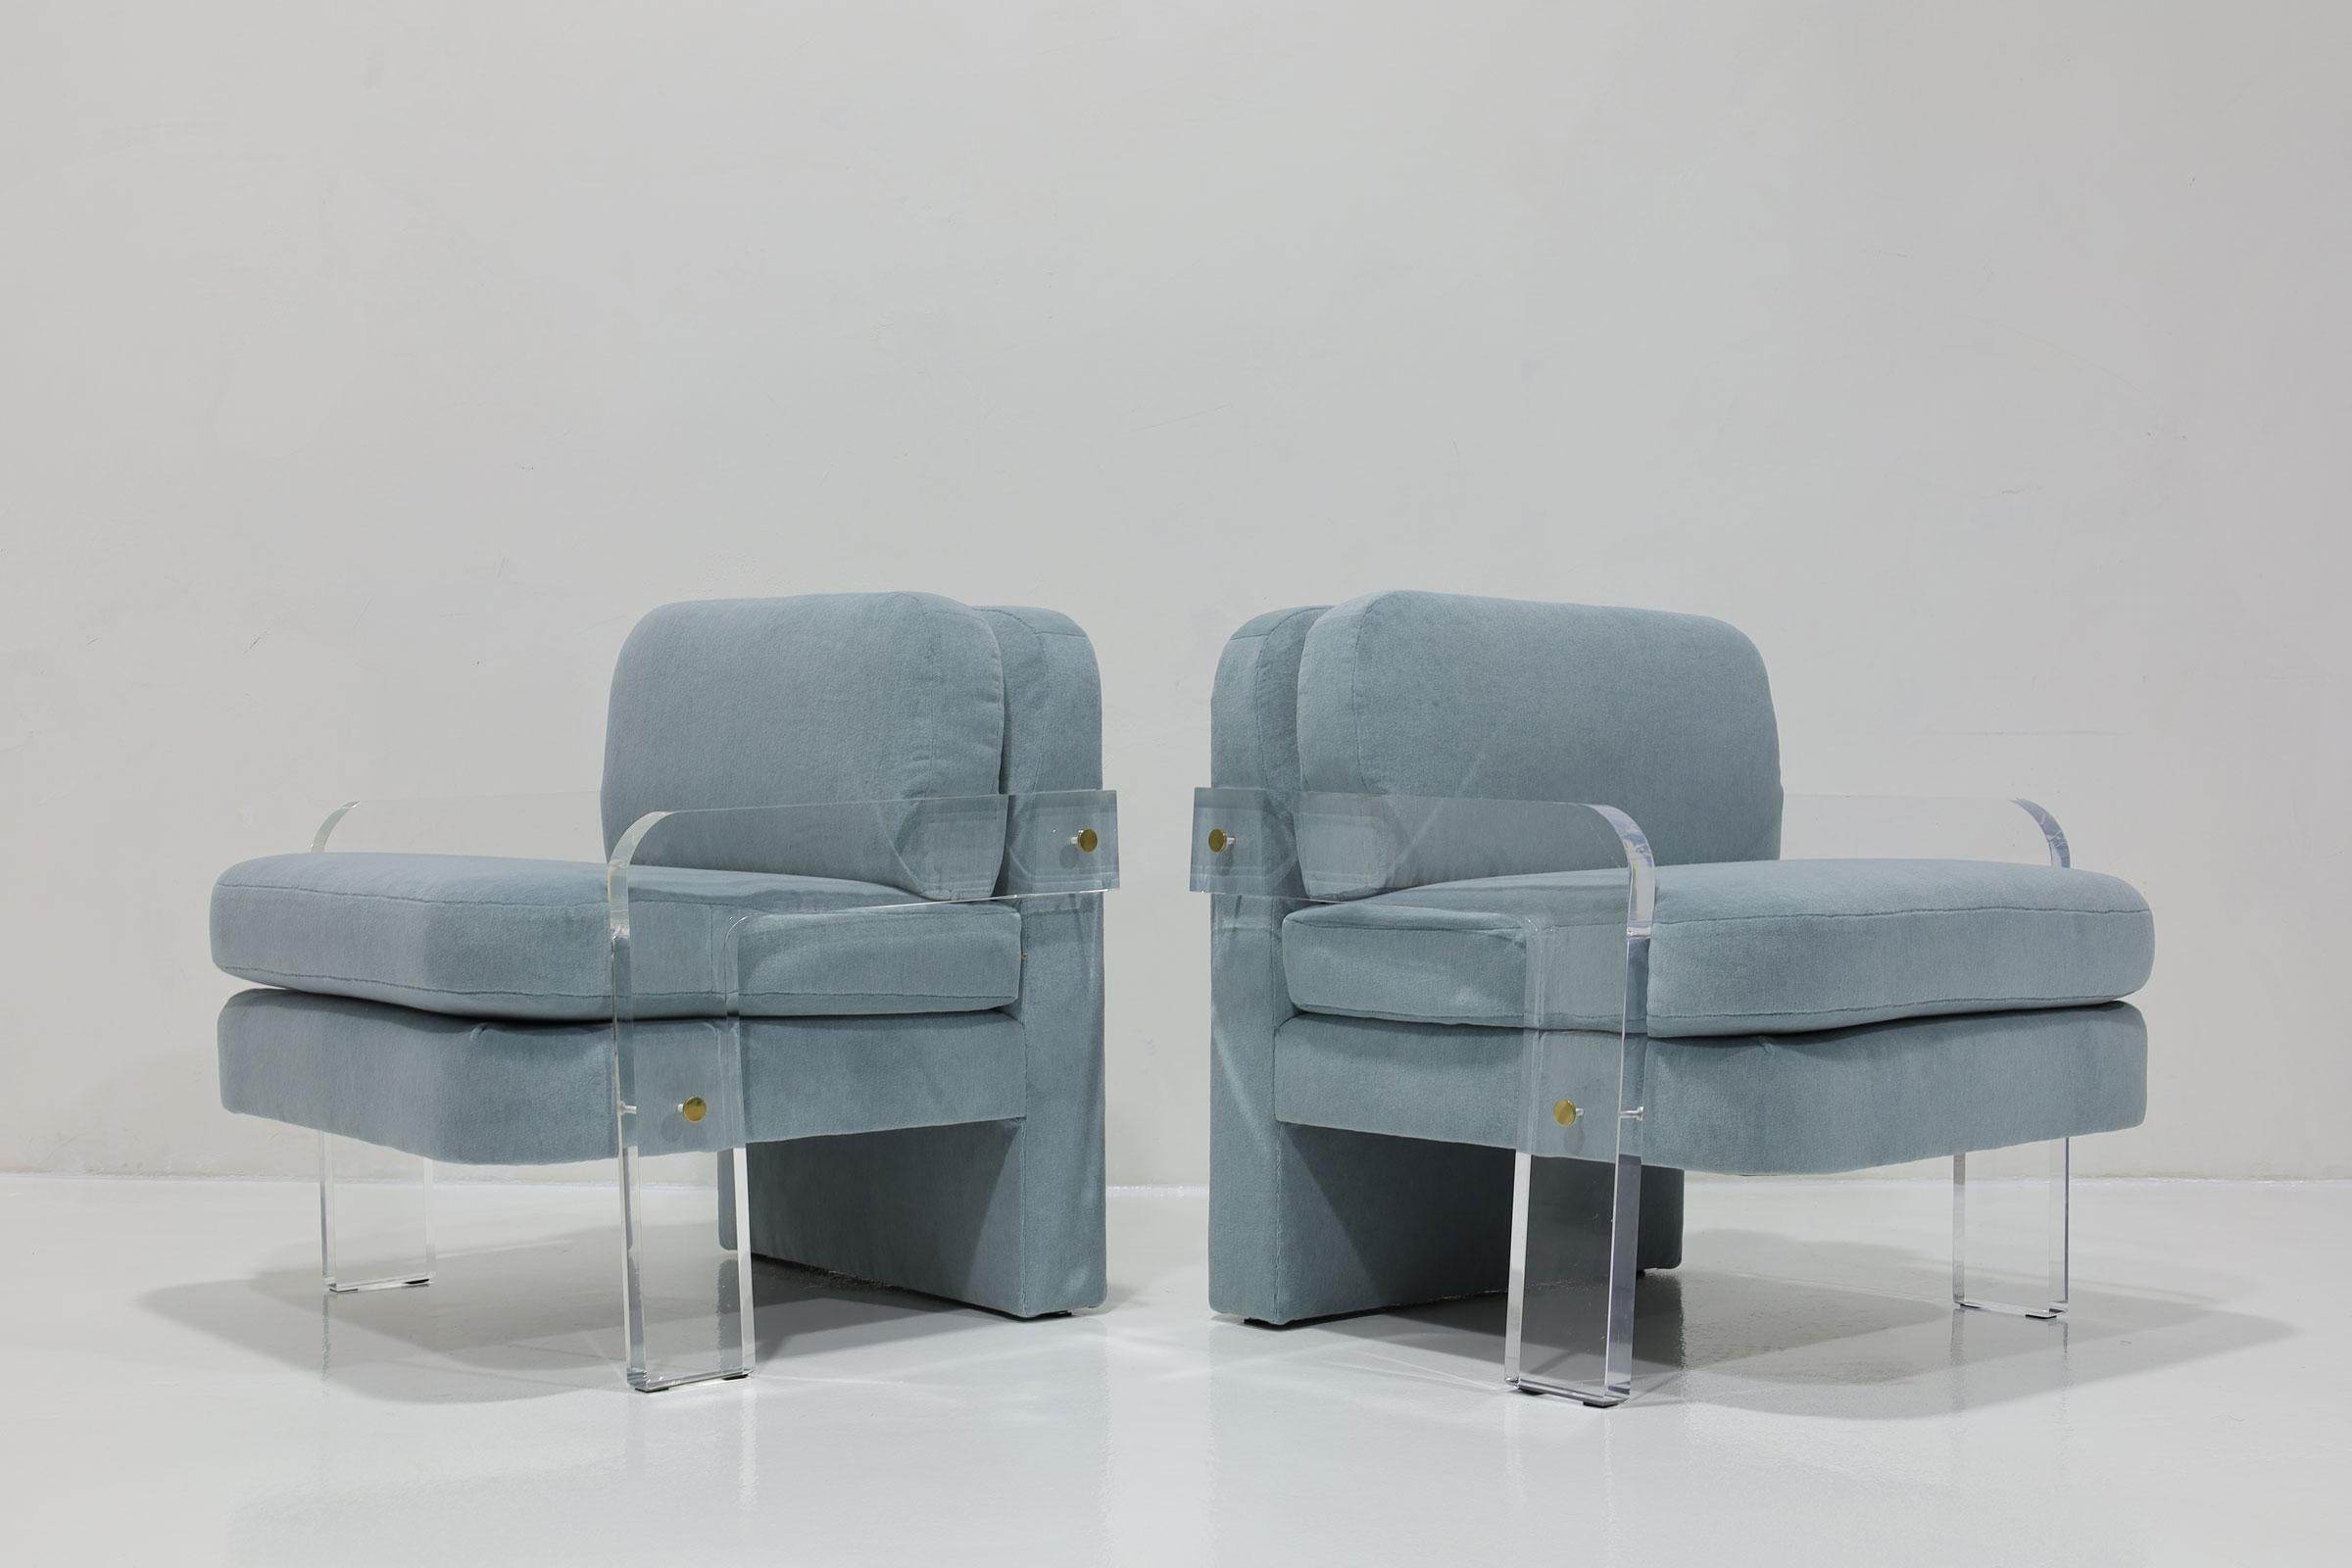 These are a pair of hard-to-find Vladimir Kagan lucite framed lounge chairs. Chairs have brass trim and we have restored by professionally polishing the lucite frames and upholstering in Holly Hunt Great Plains Alpaca in a soft blue. The chairs are